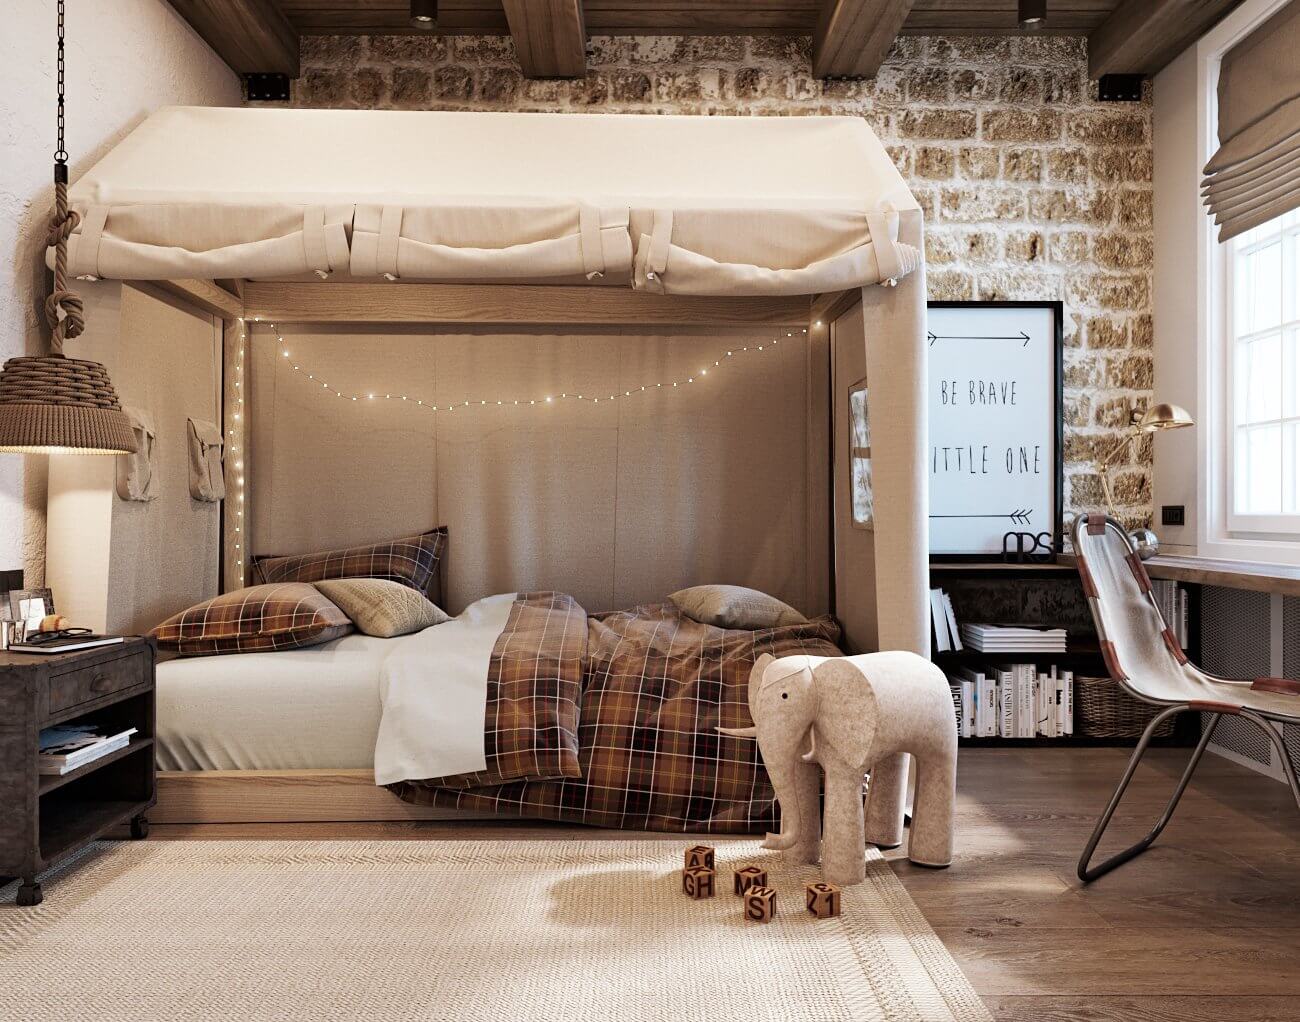 The Villa in Italy kids room bed - cgi visualization